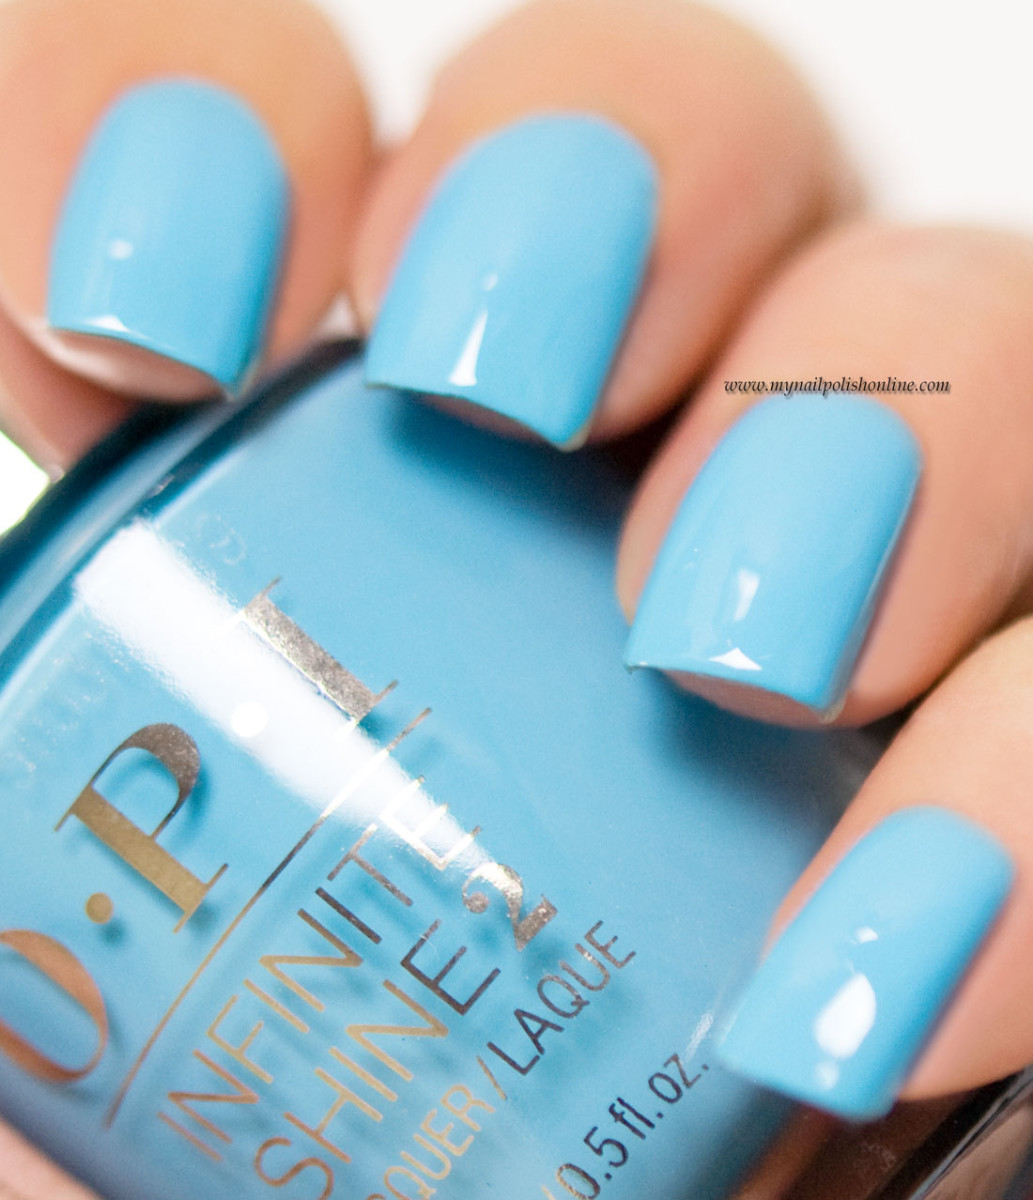 OPI Infinity Shine - To Infinity and Blue-yond - My Nail Polish Online